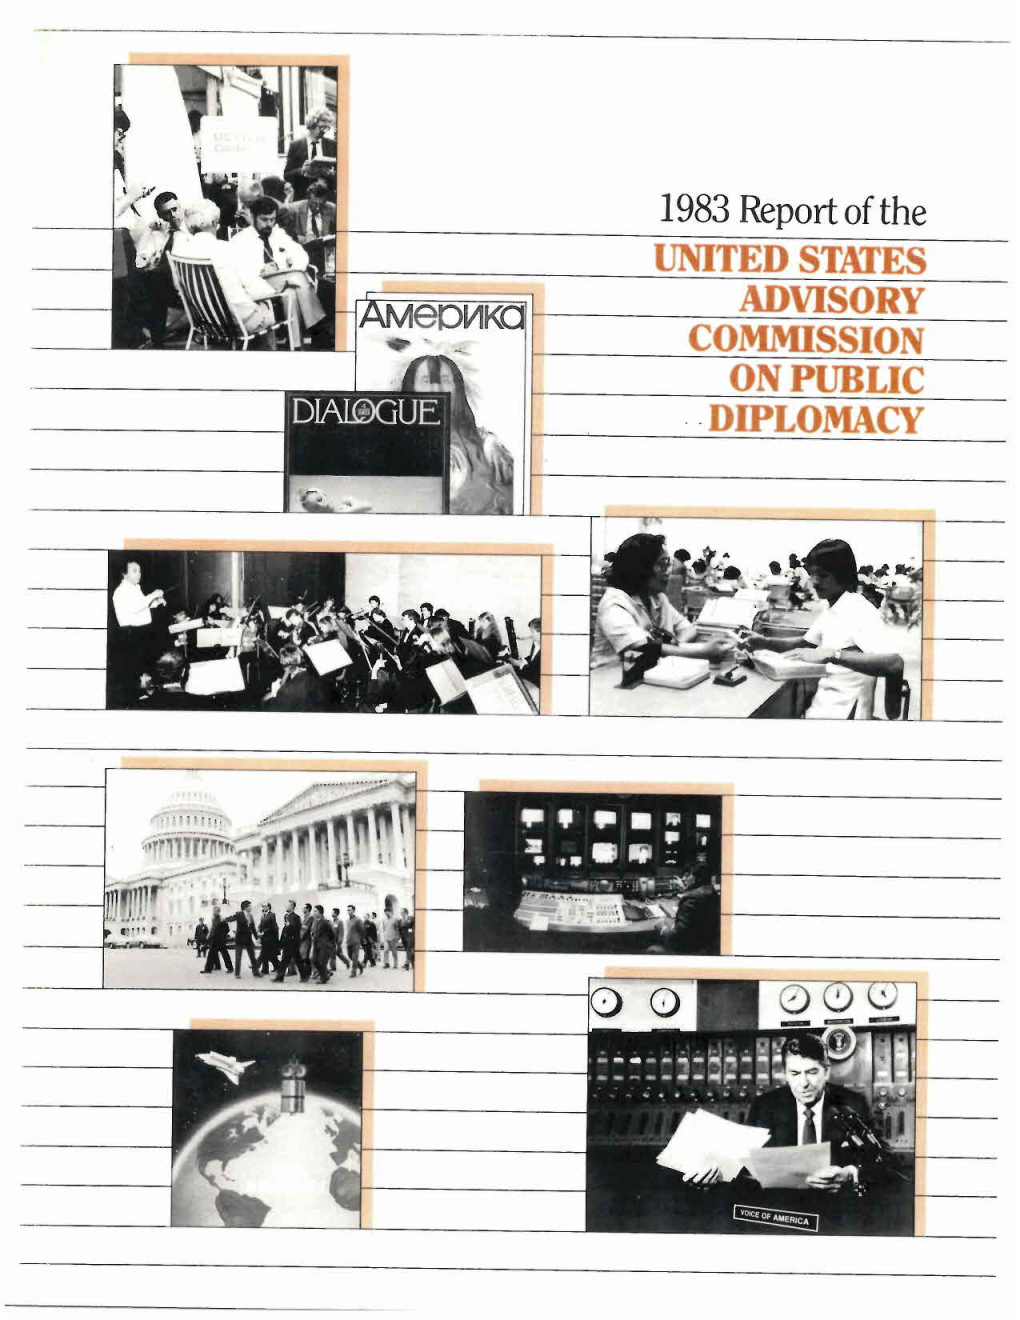 1983 Report of the UNITED STATES ADVISORY COMMISSION on PUBLIC ··DIPLOMACY 1983 Report of the UNITED STATES ADVISORY COMMISSION on PUBLIC